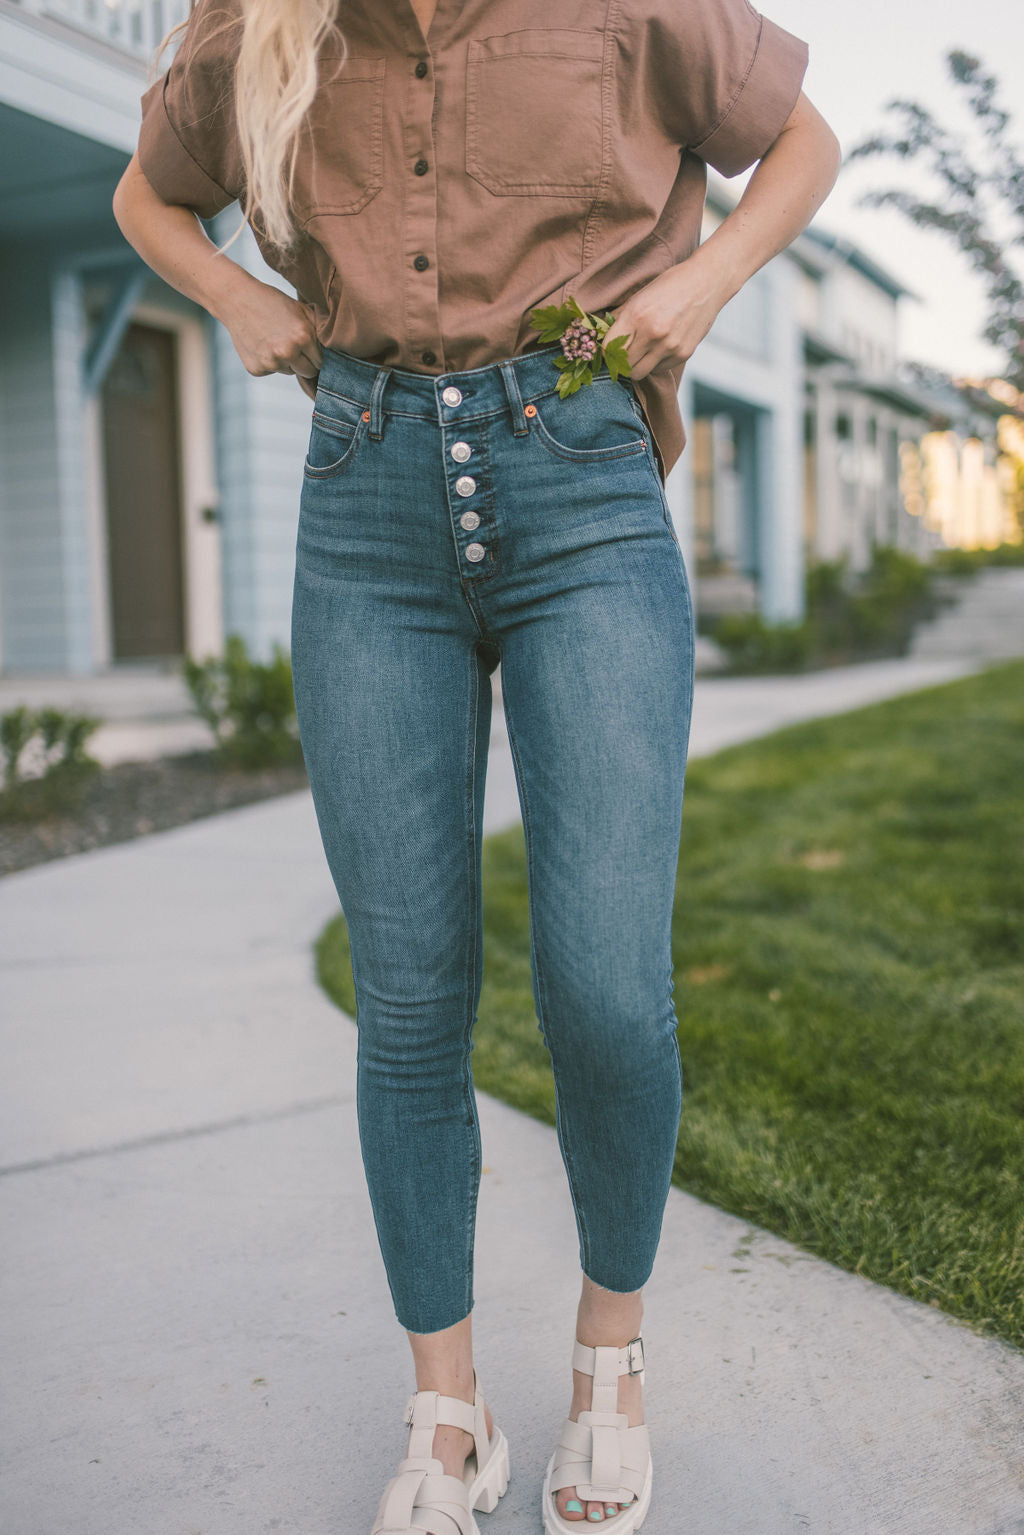 High Waisted Button Detail Skinny Jeans